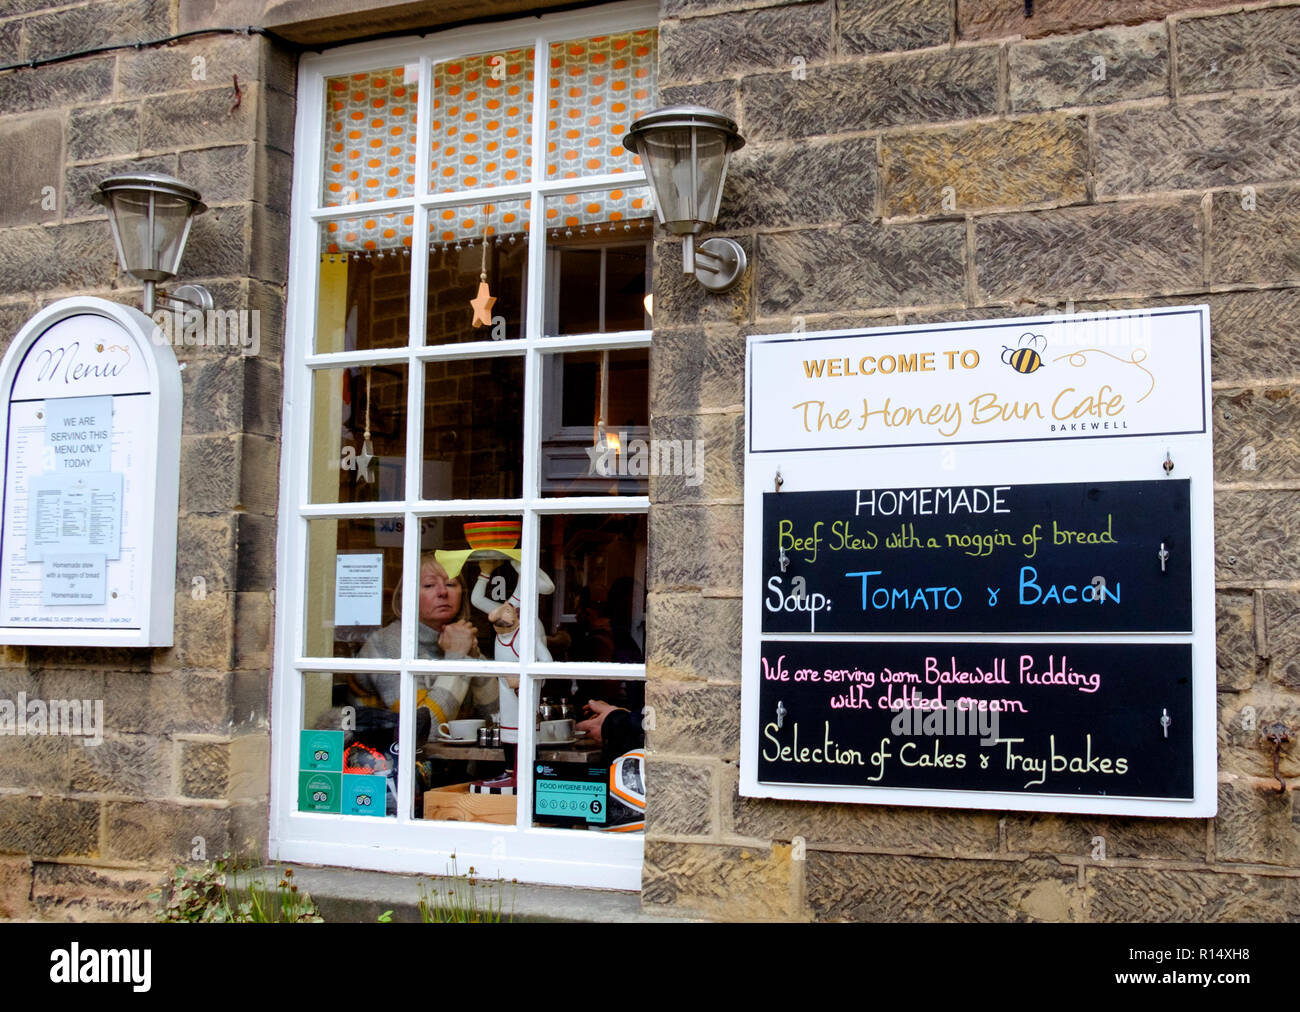 Bakewell, a market town in the Derbyshire Dales, Derbyshire, England UK The Honeybee Cafe Stock Photo